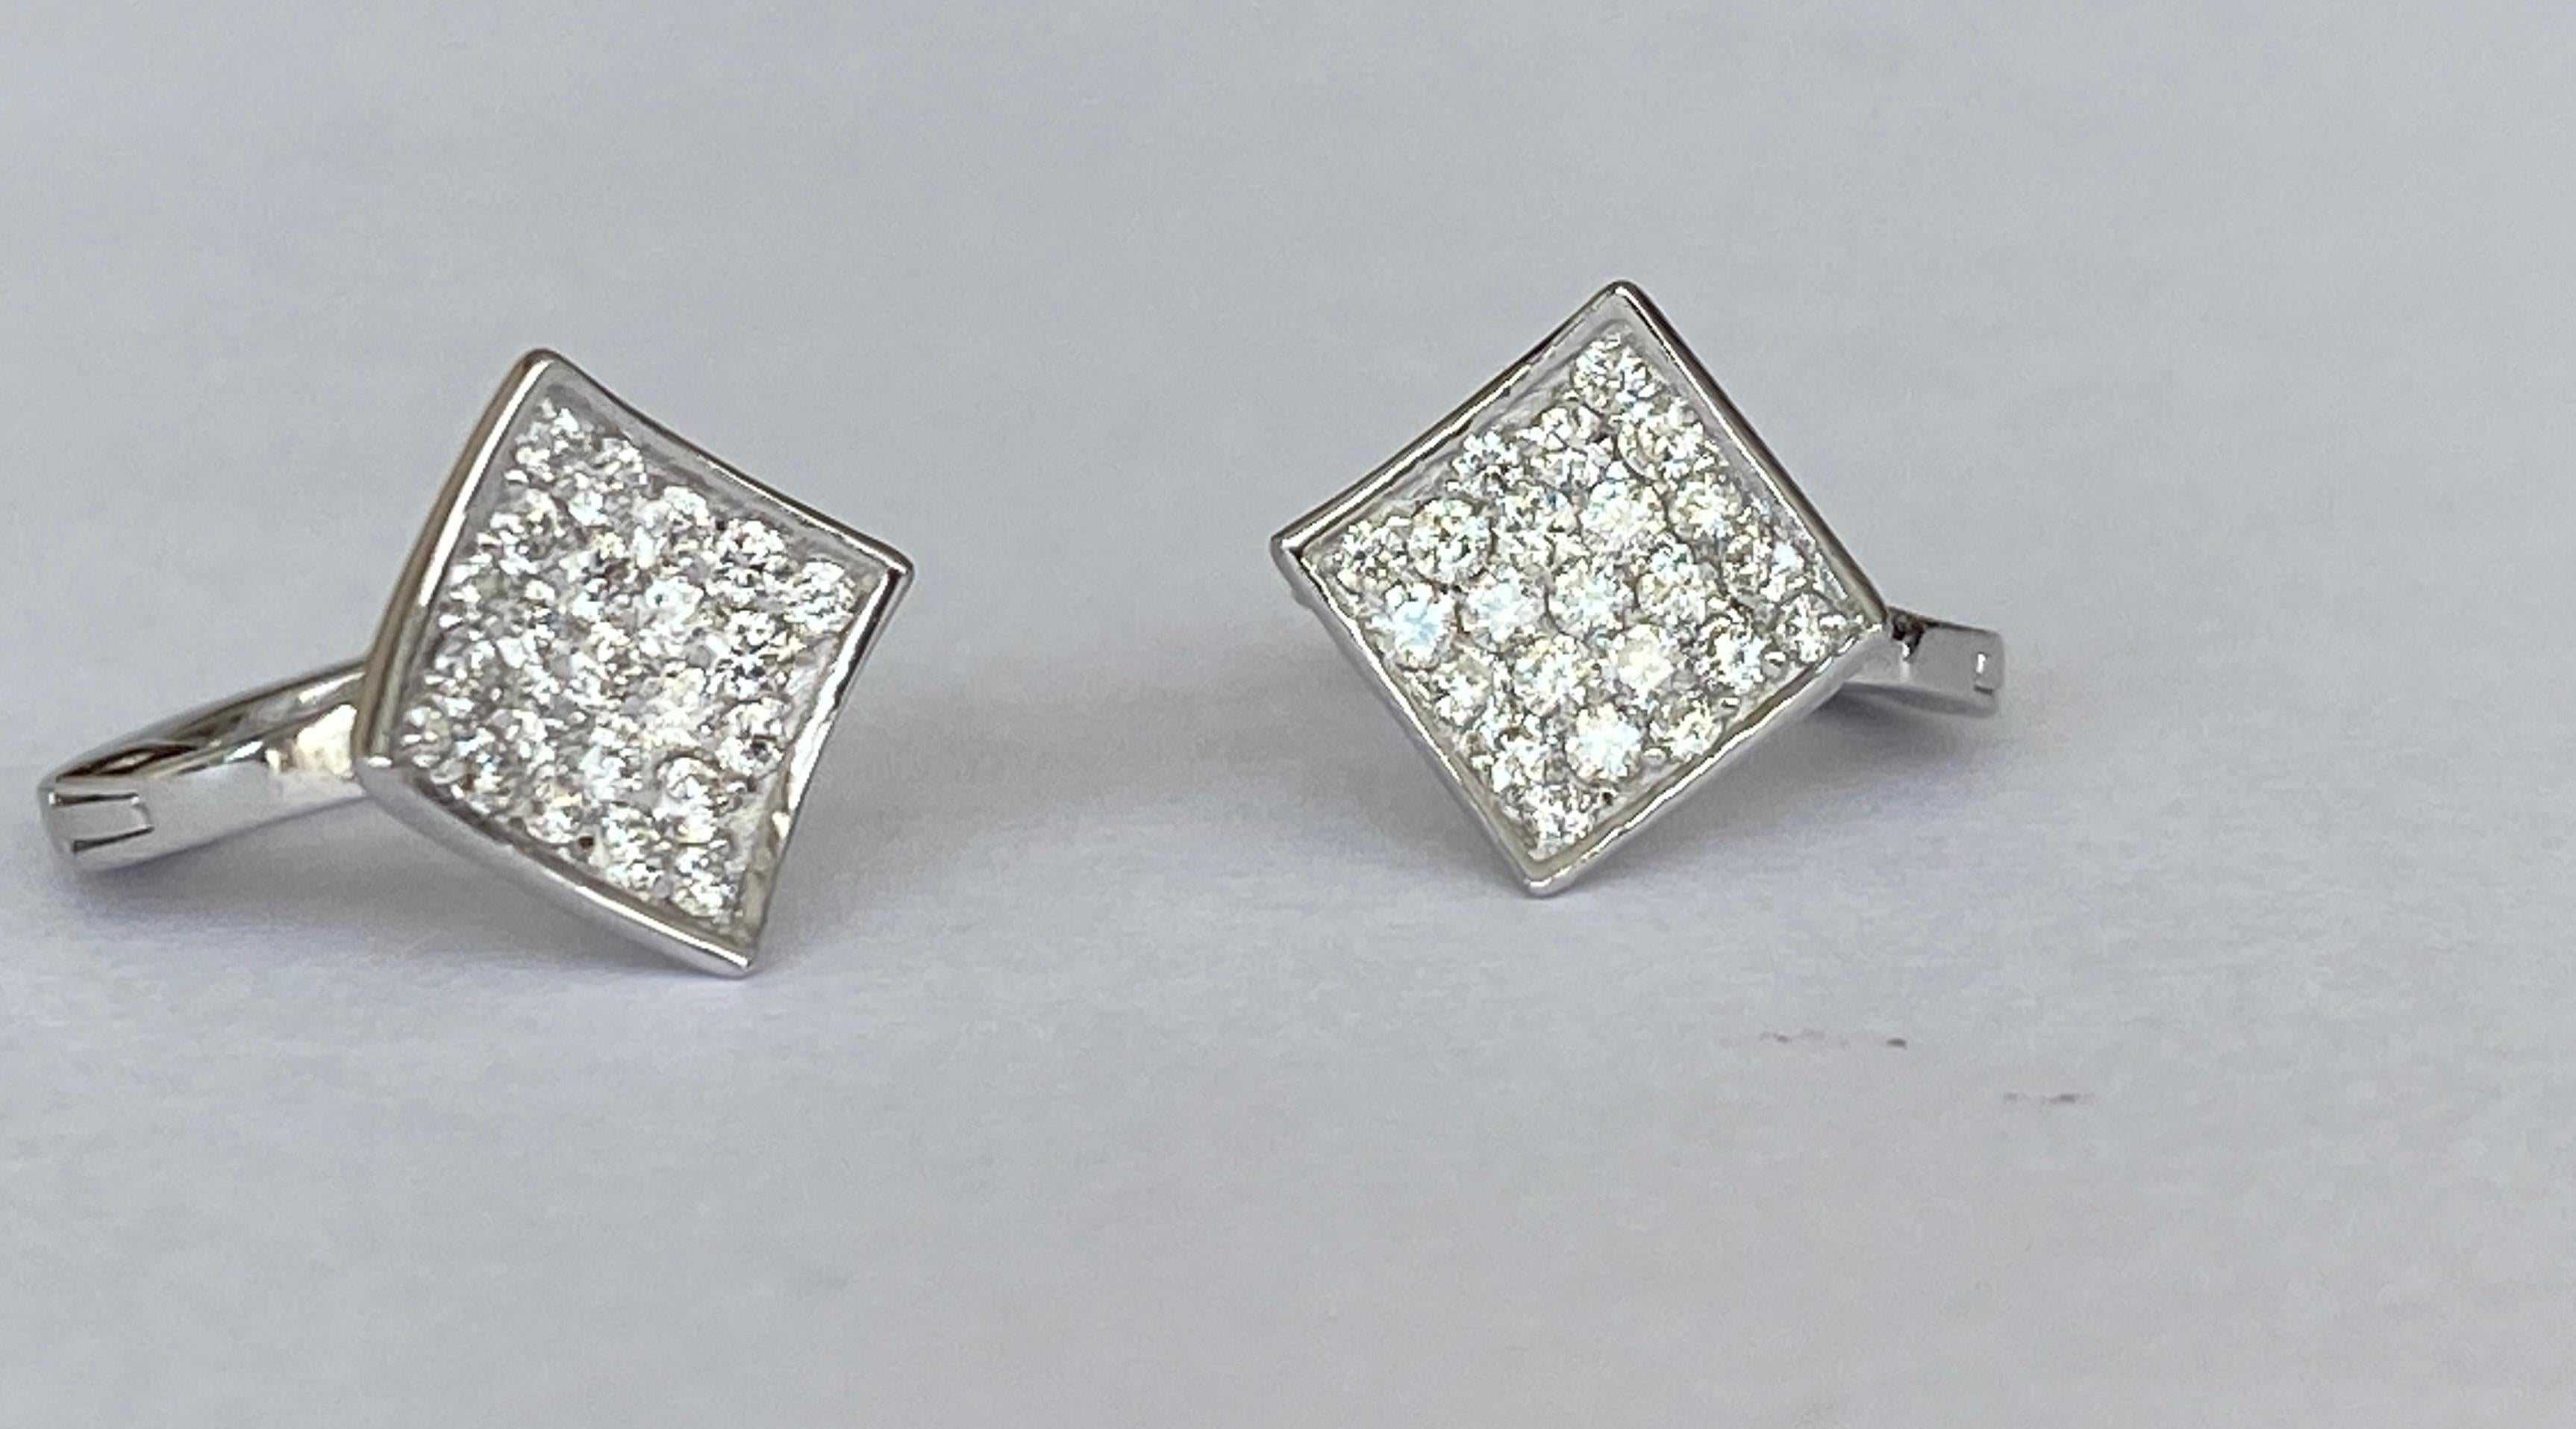 Offered new, design 18 kt creoles on the front set with 46 brilliant cut diamonds of 0,40 ct of quality F/VS
Gold content: 18 kt (hallmarked)  
Size: 10mm*10mm*13mm 
Weight: 2,4 grams
Working for couple of years for one of the famous diamond